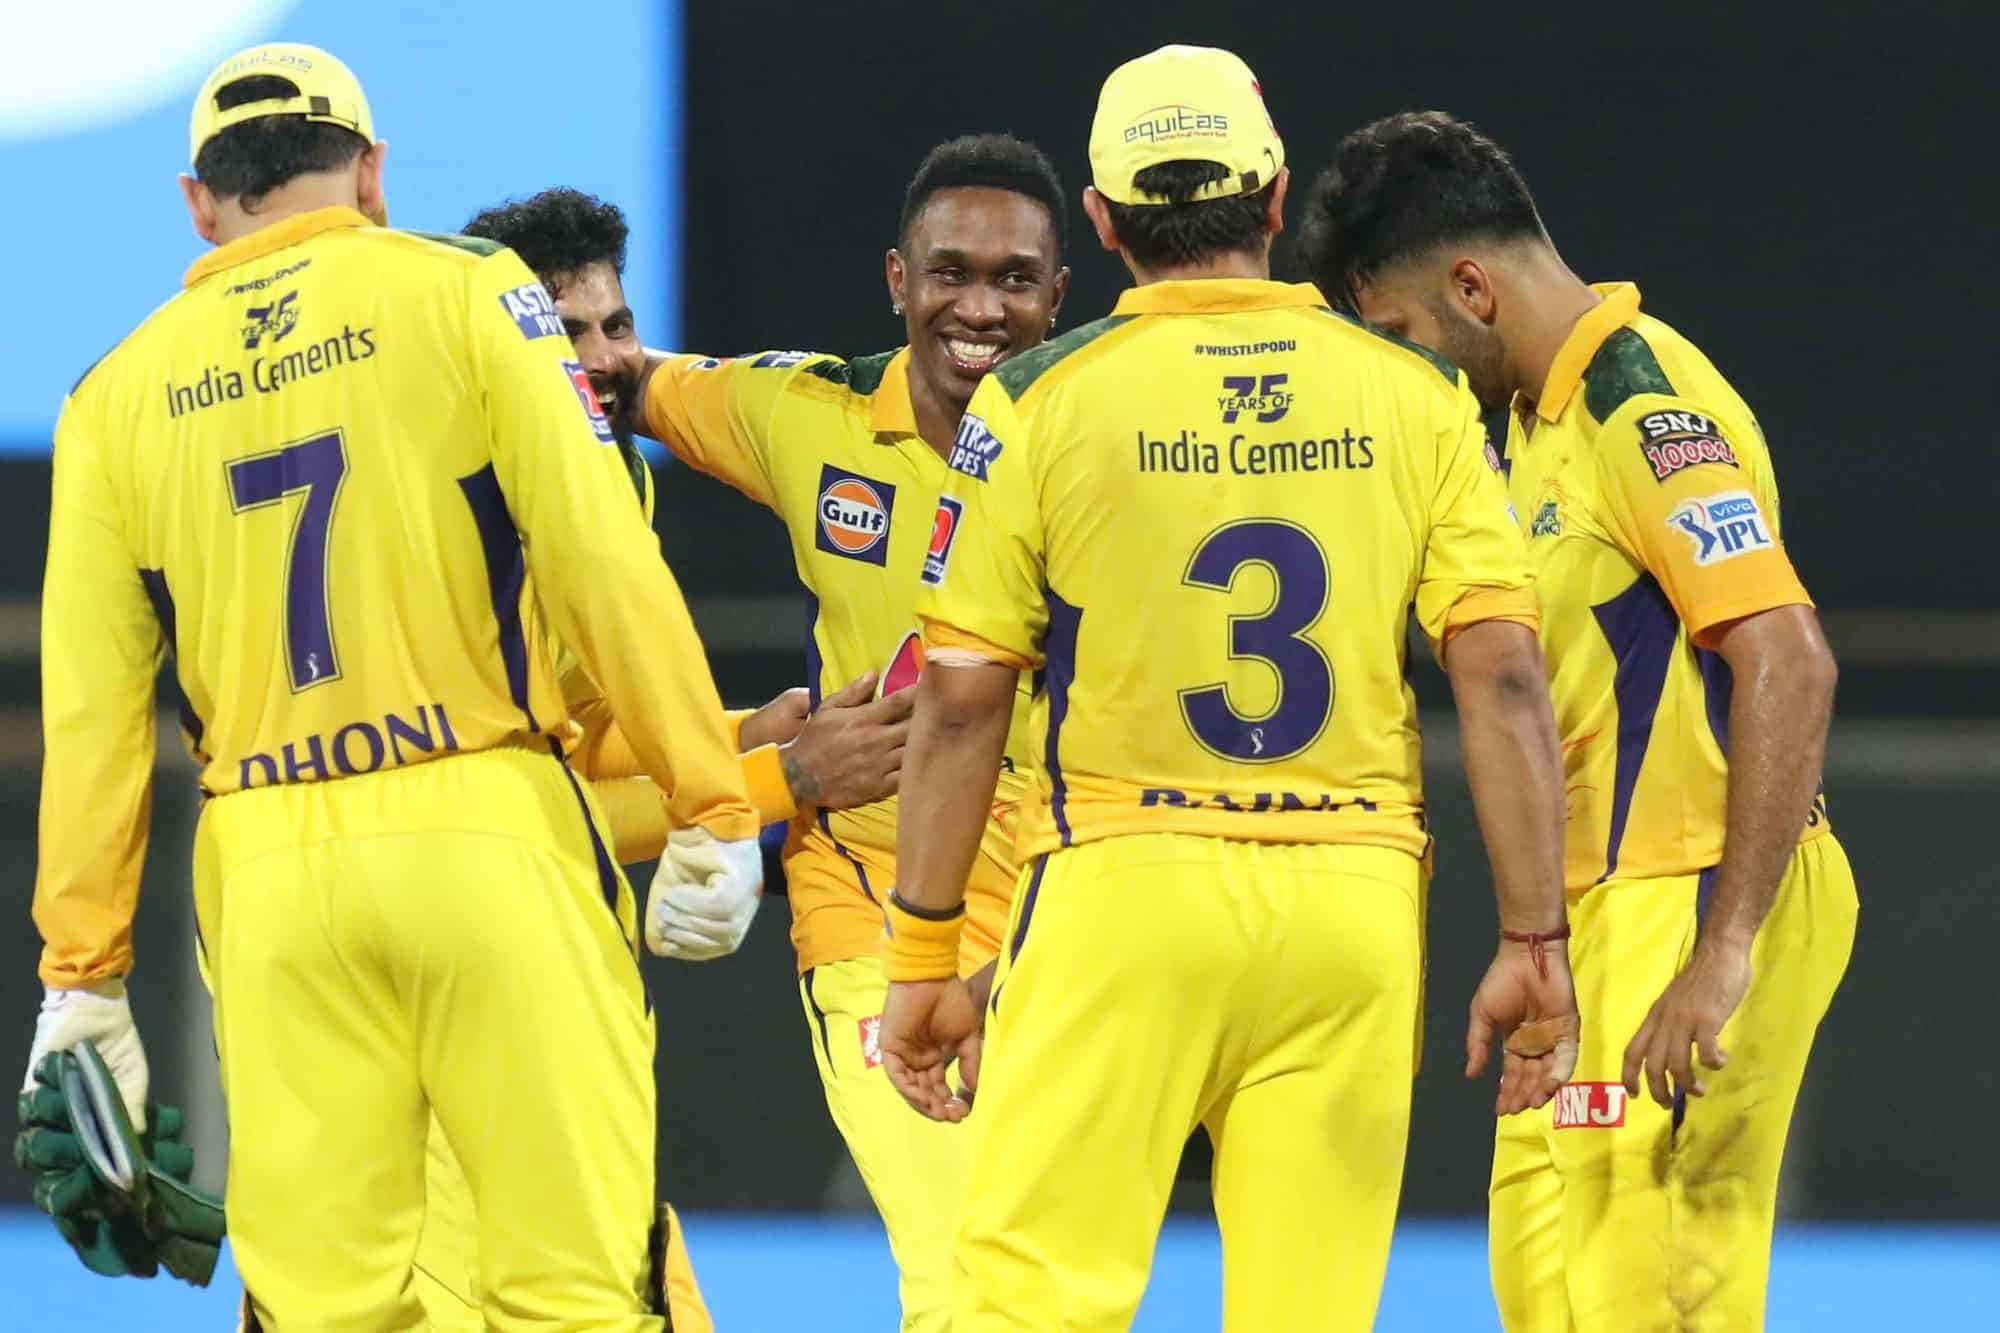 CSK team celebrating victory with their roaring gold and yellow spirit